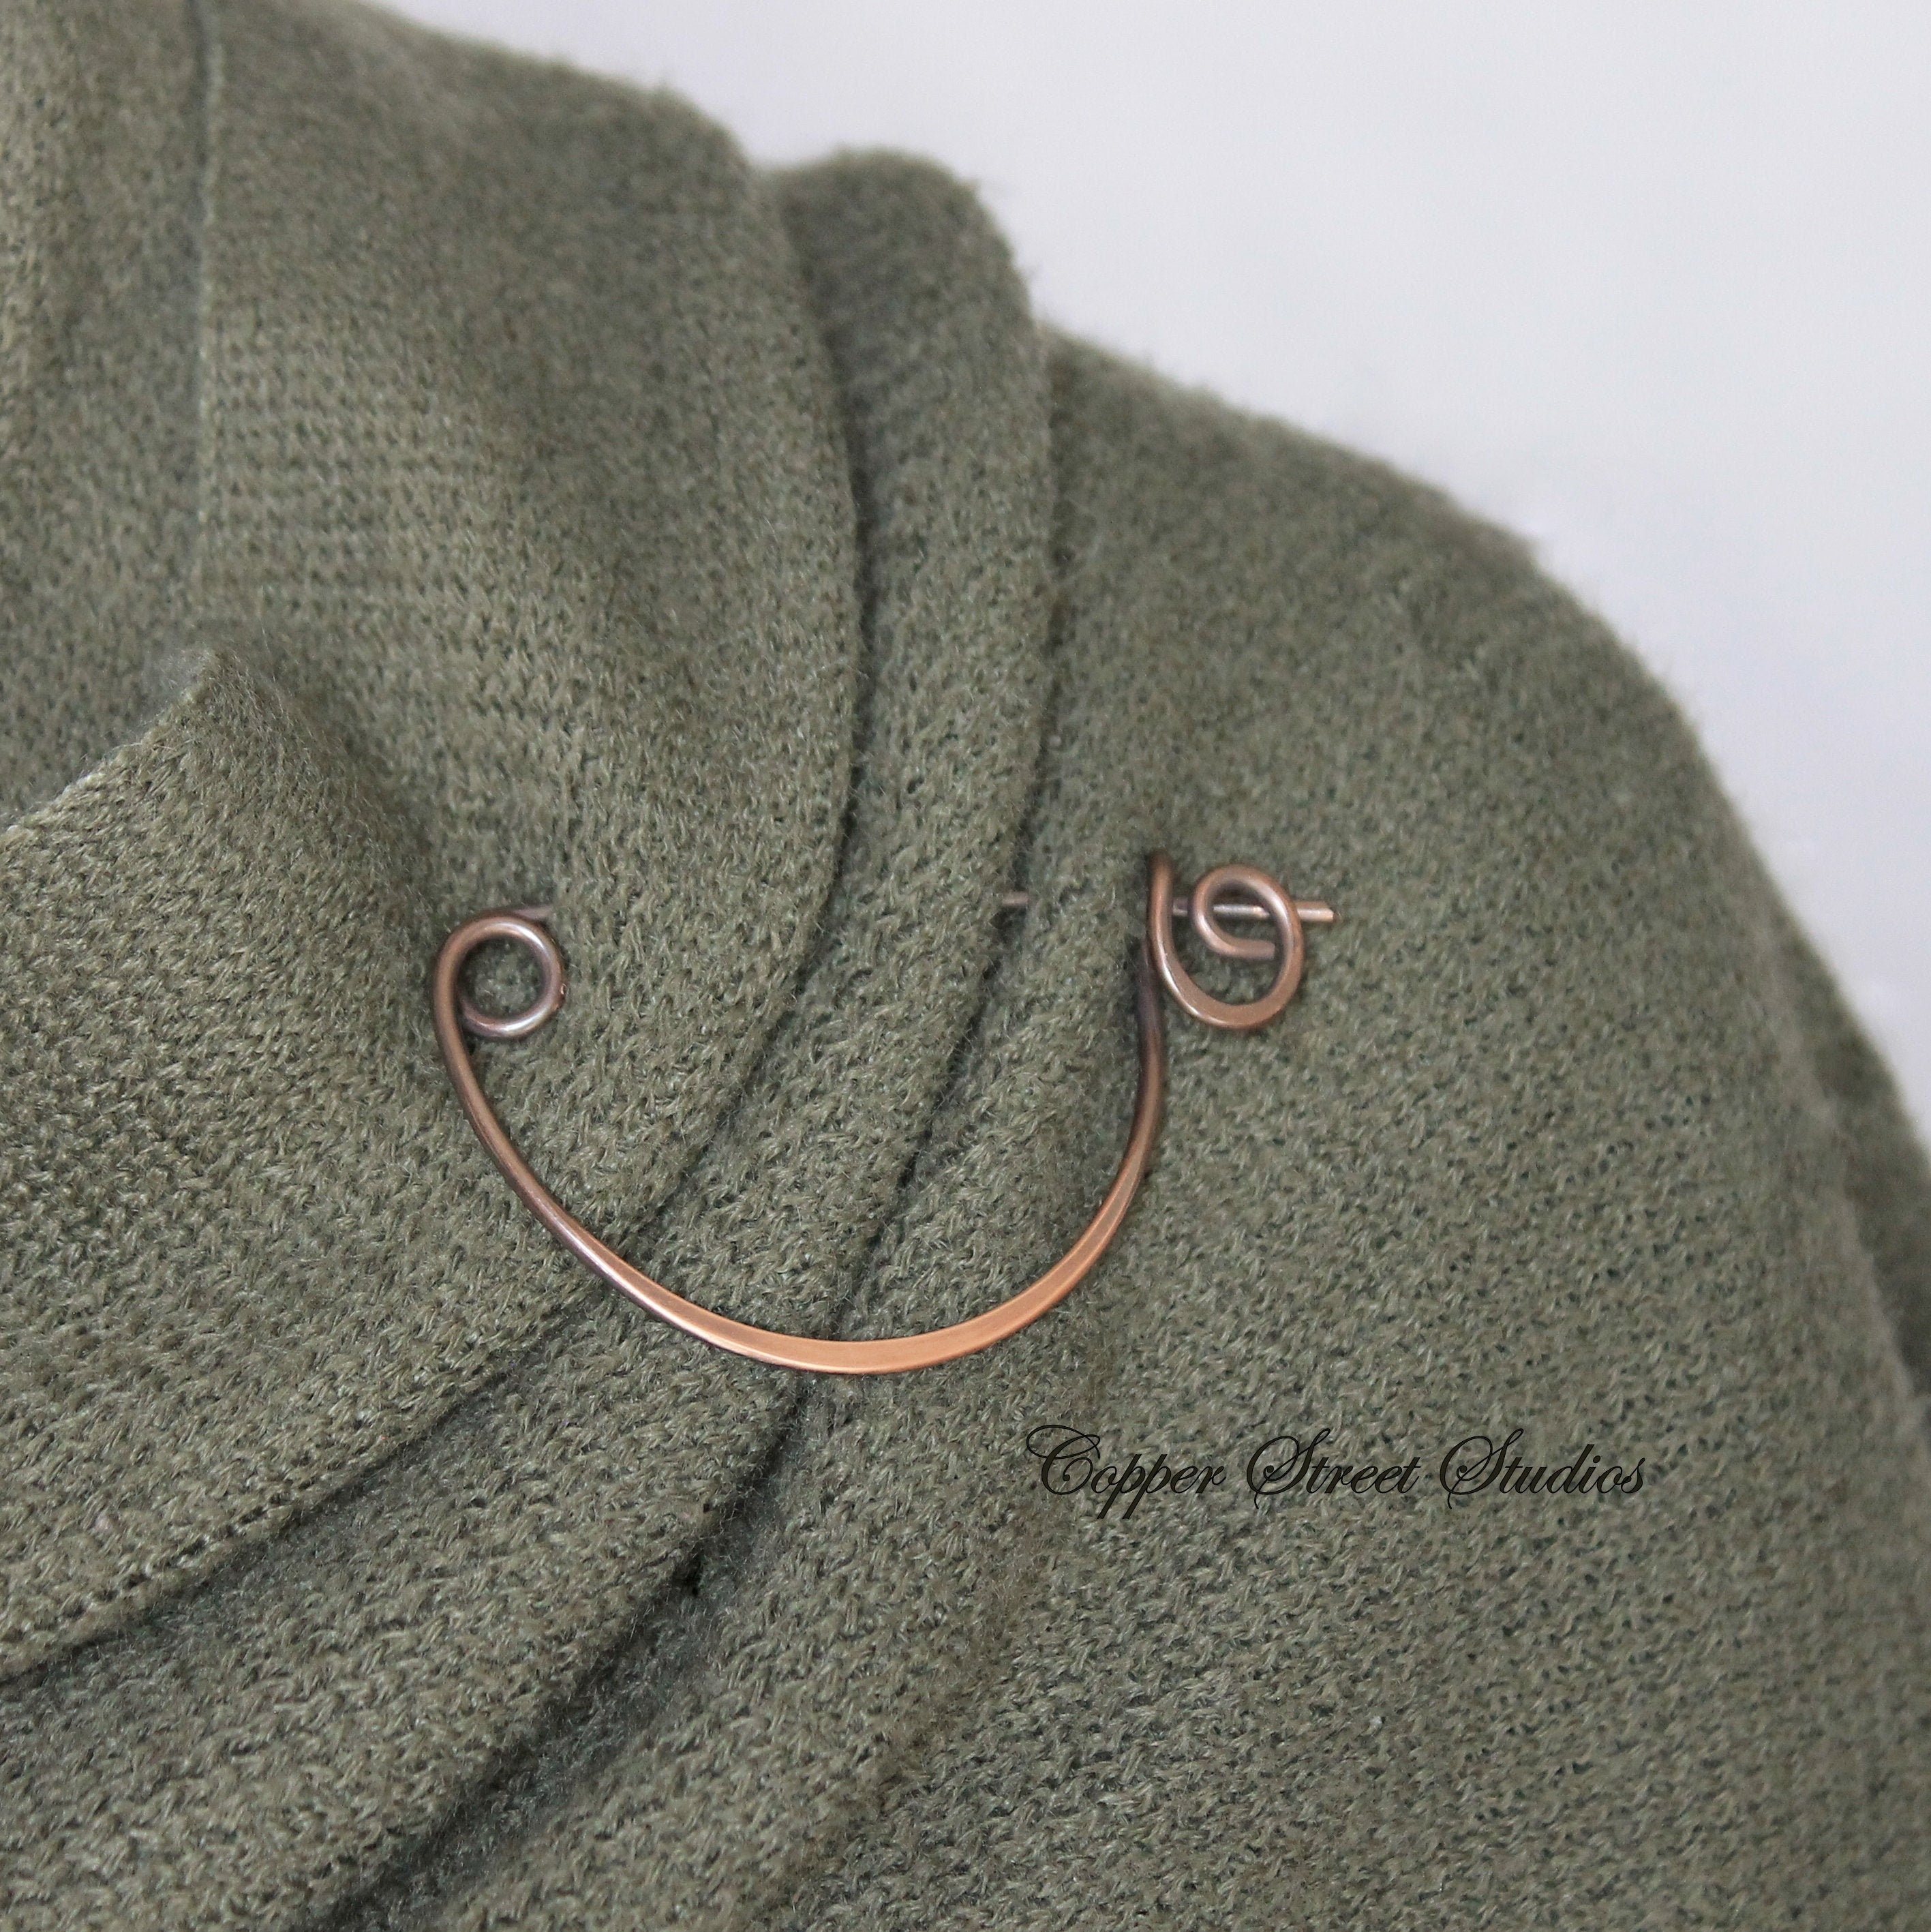 Copper Shawl Pin, Handforged Large Safety Pin, Knit Crochet Accesso